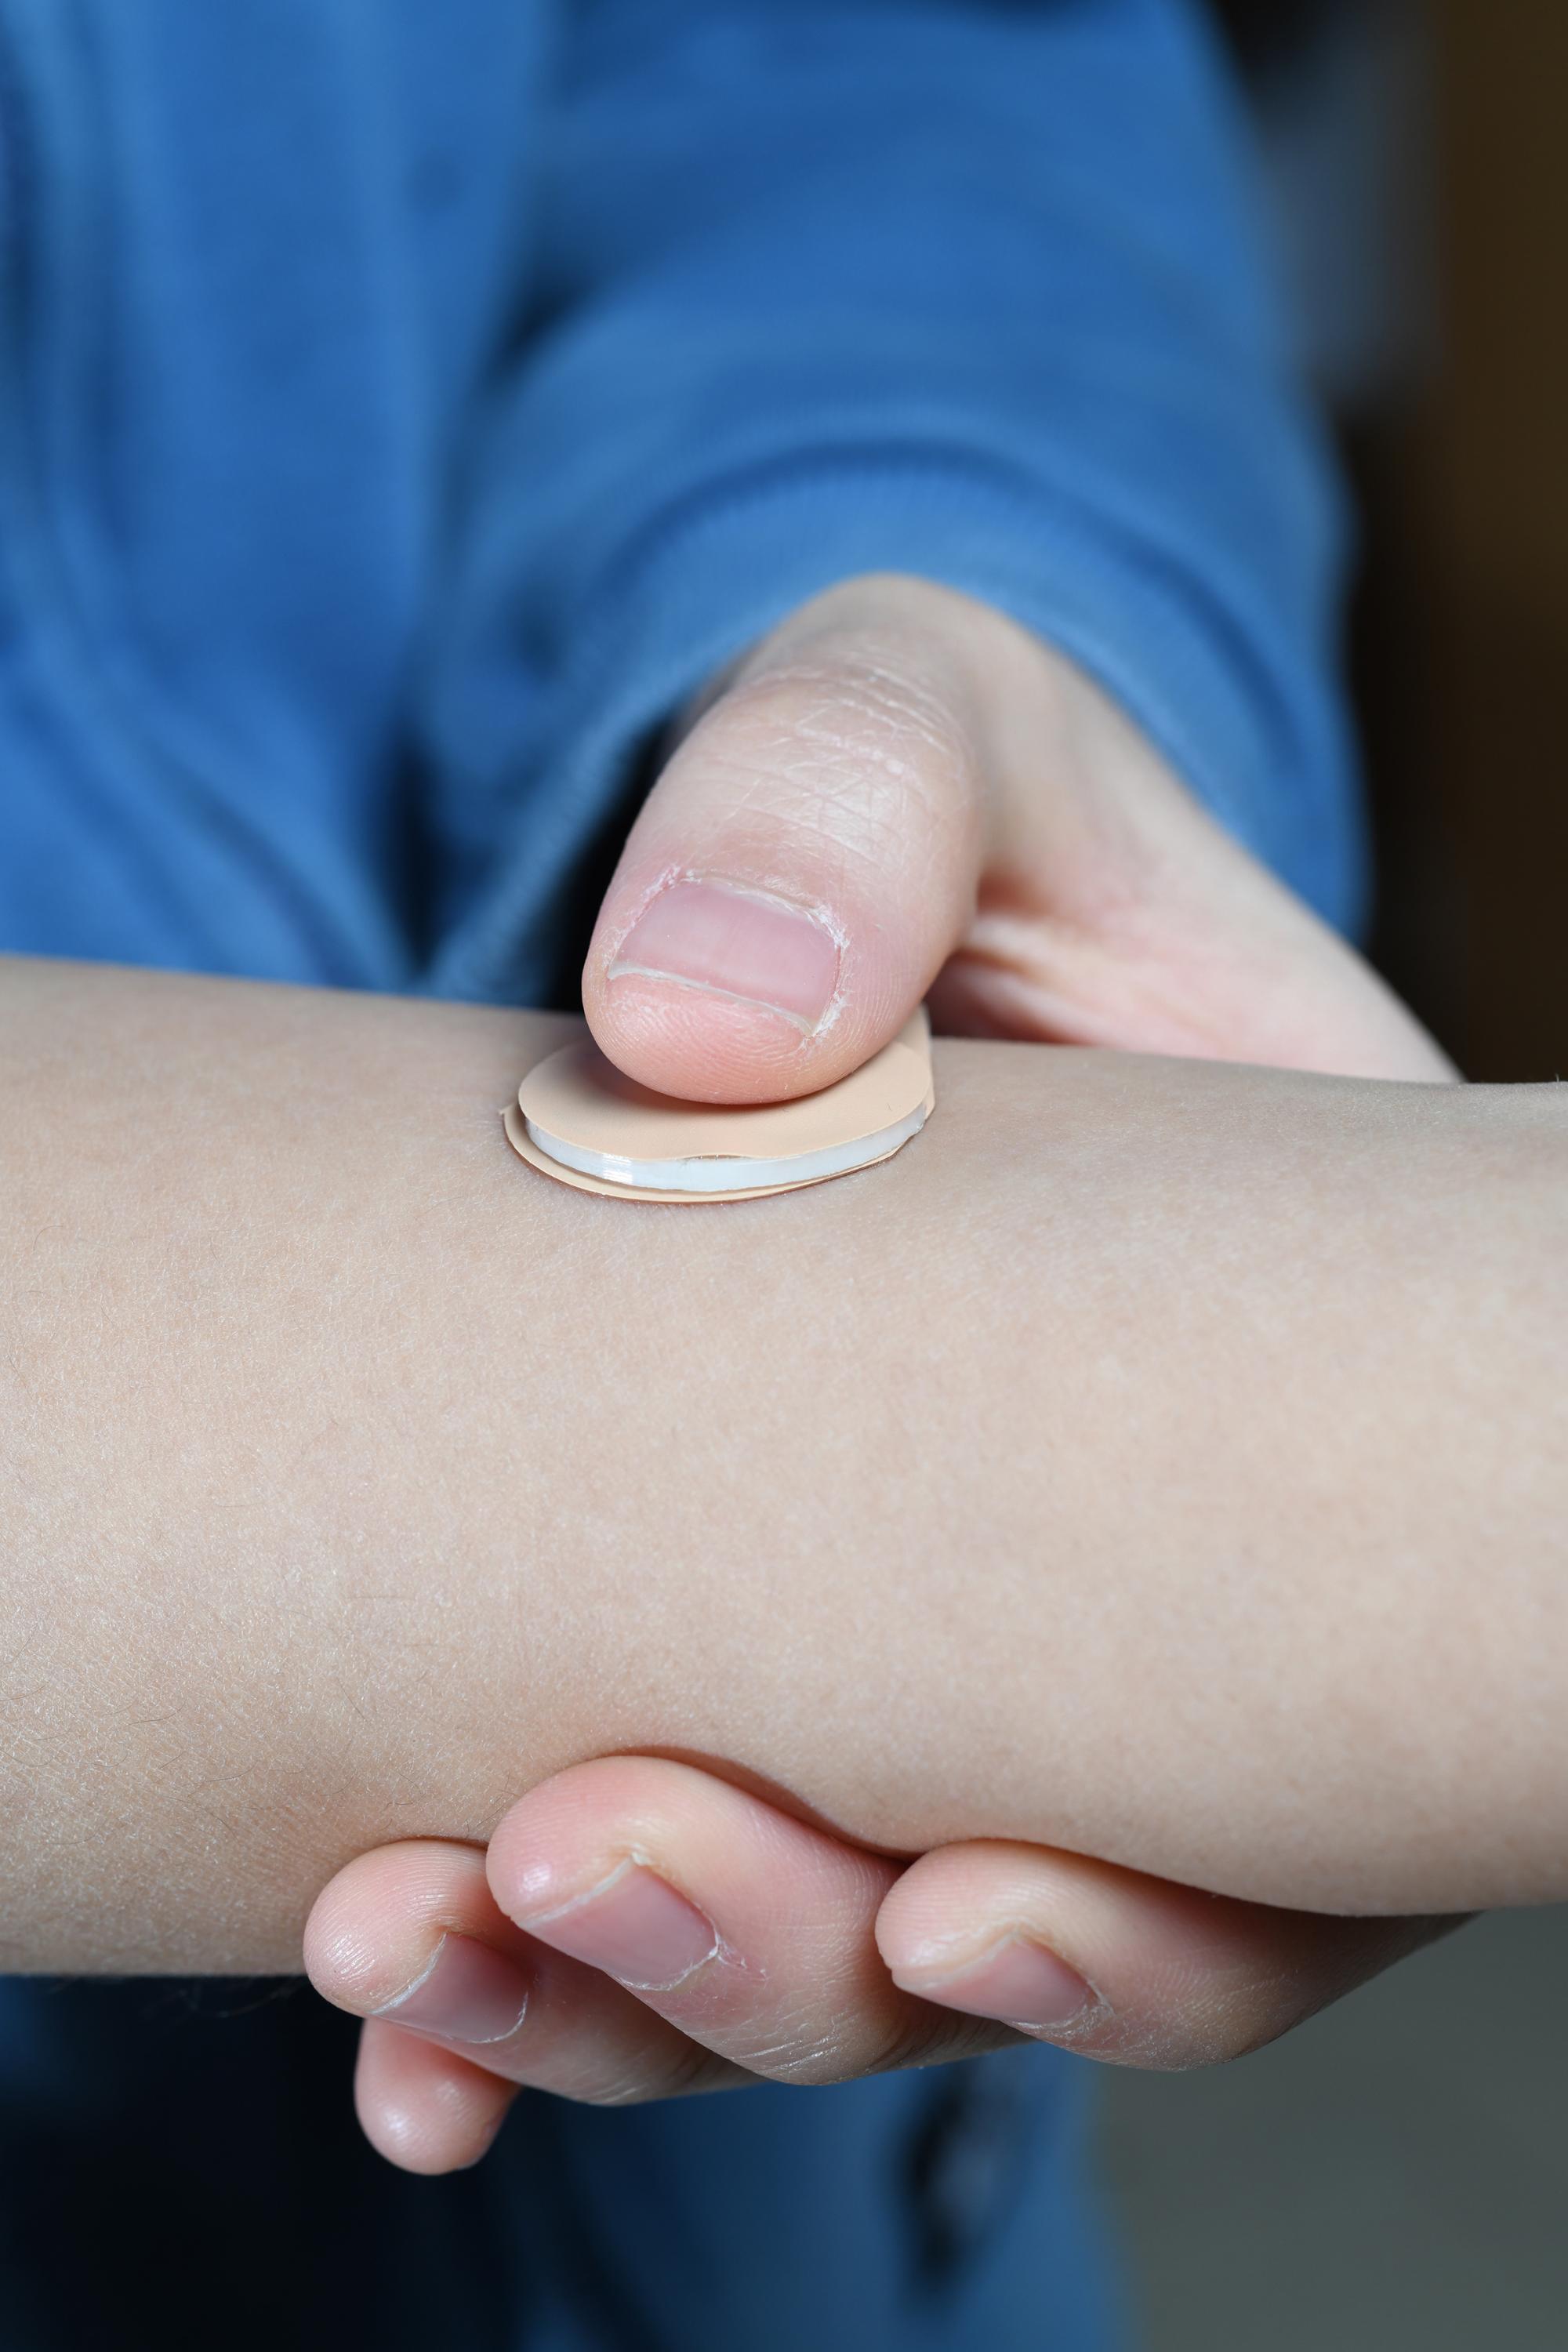 Image shows how an experimental microneedle contraceptive skin patch could be applied to the skin. Designed to be self-administered by women for long-acting contraception, the patch could provide a new family planning option. (Credit: Christopher Moore, Georgia Tech)